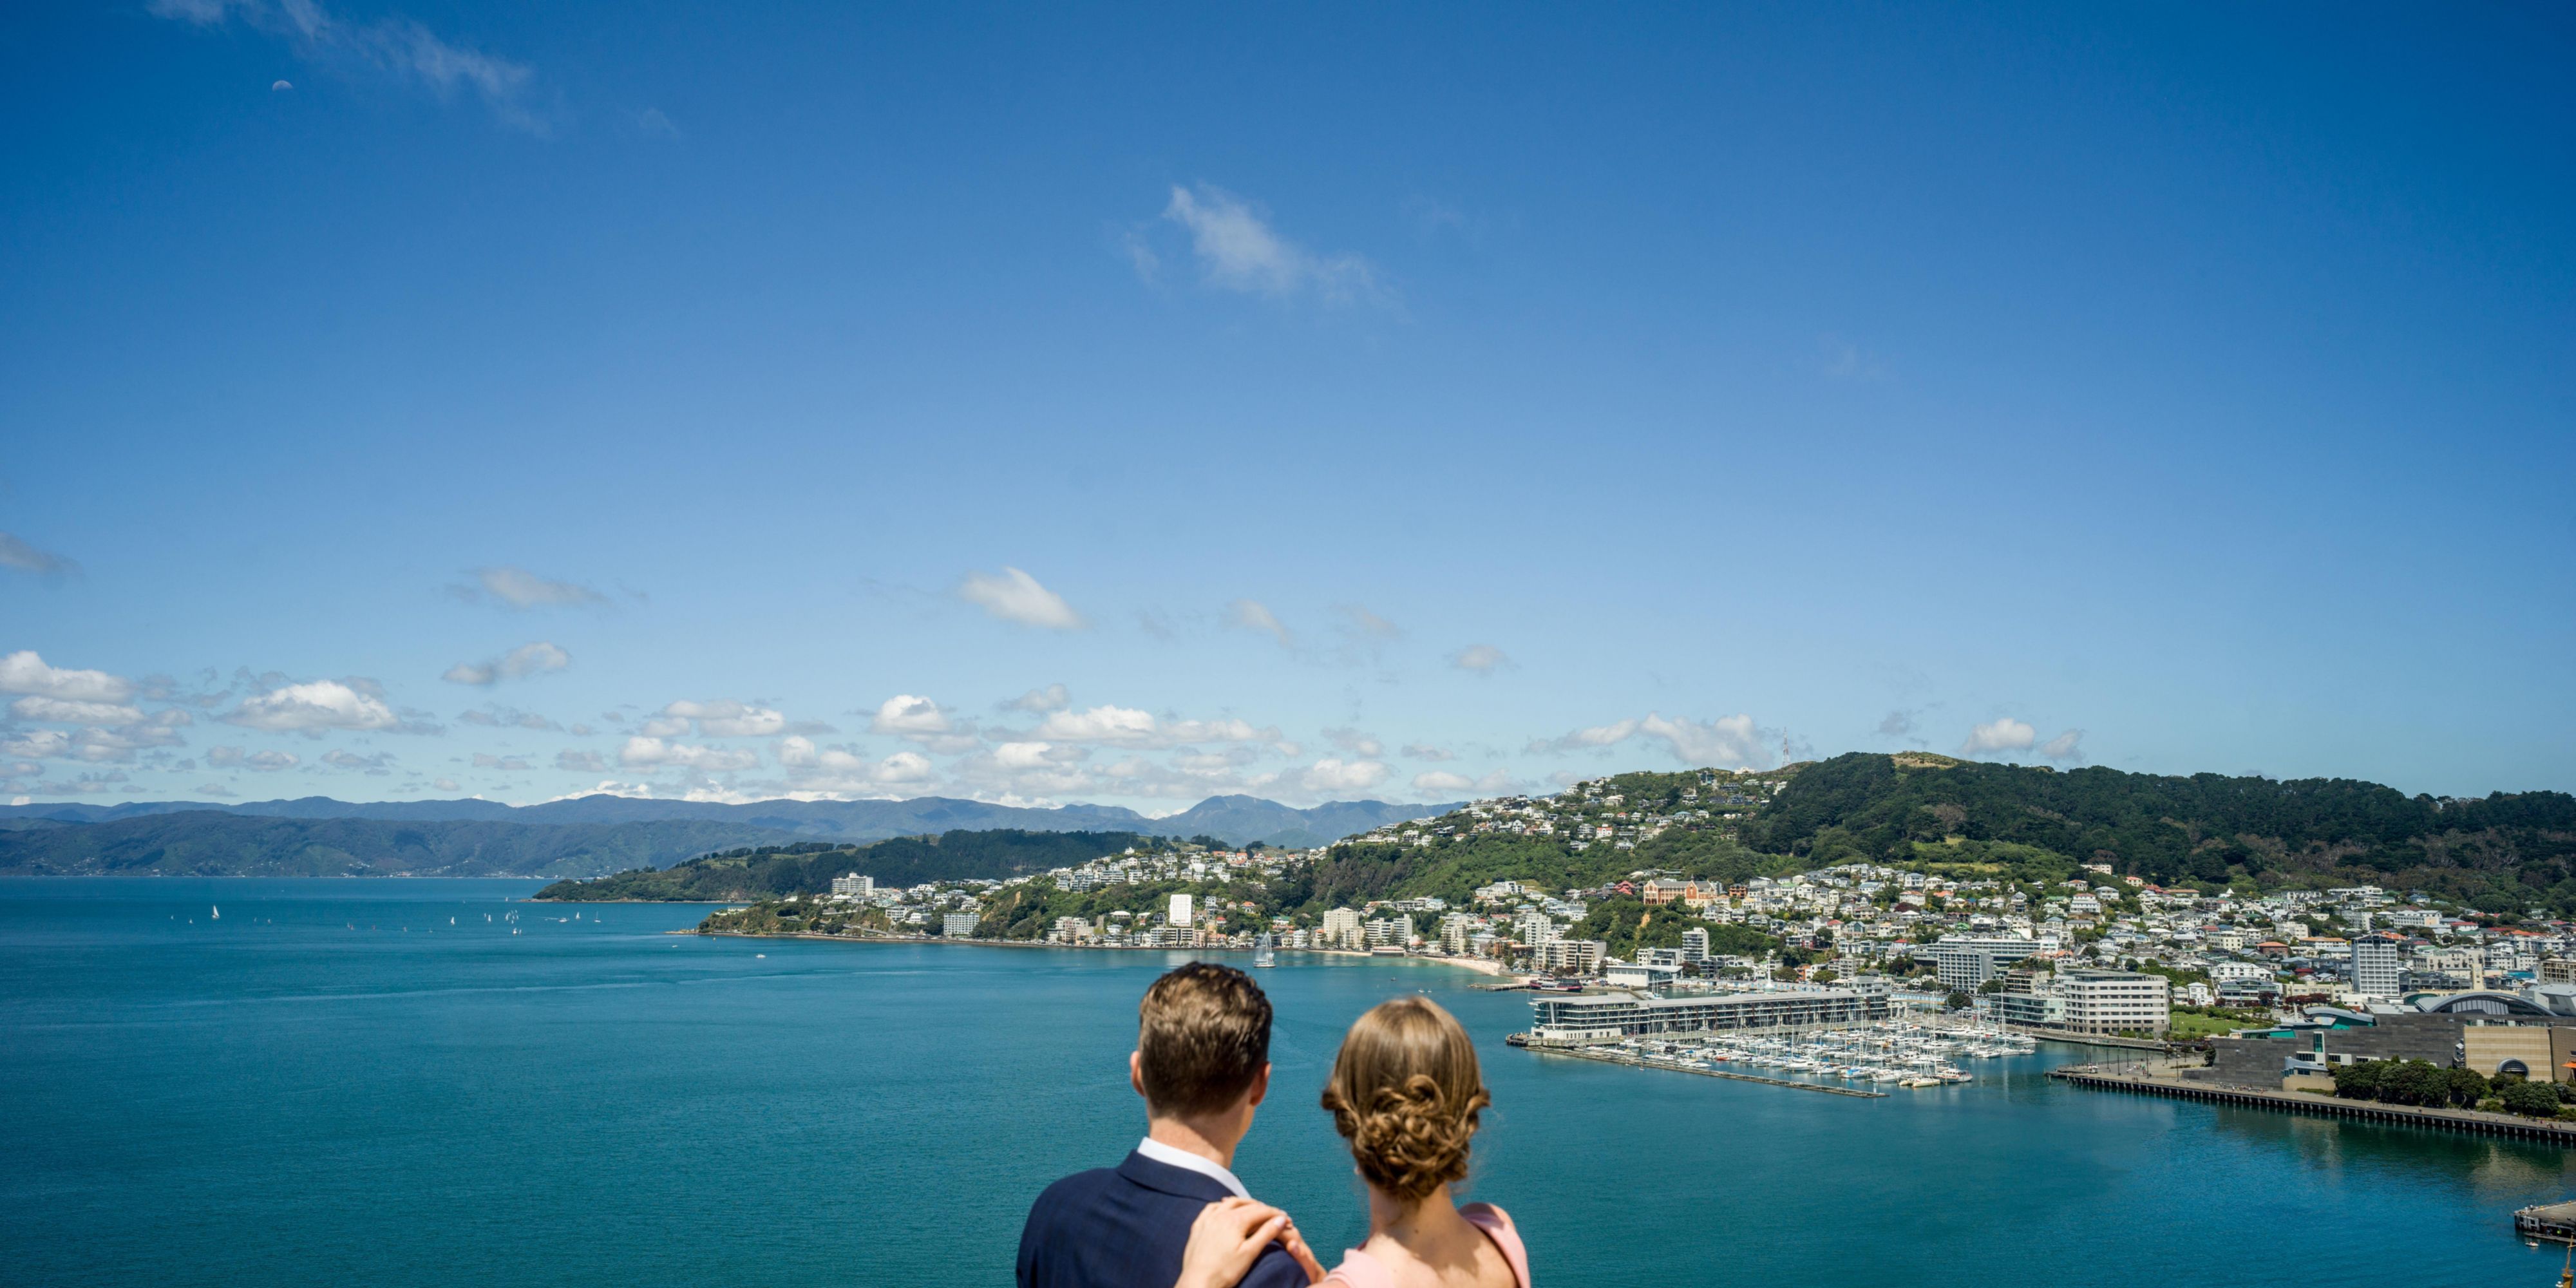 A city known for its arts, café culture, bar and restaurant scene, stunning harbour and surrounding suburban hillside, it is clear why Wellington is ranked among top world destinations. With our location adjacent to the waterfront, discover the top attractions and hidden gems with the help of insider knowledge from our award-winning concierge team.